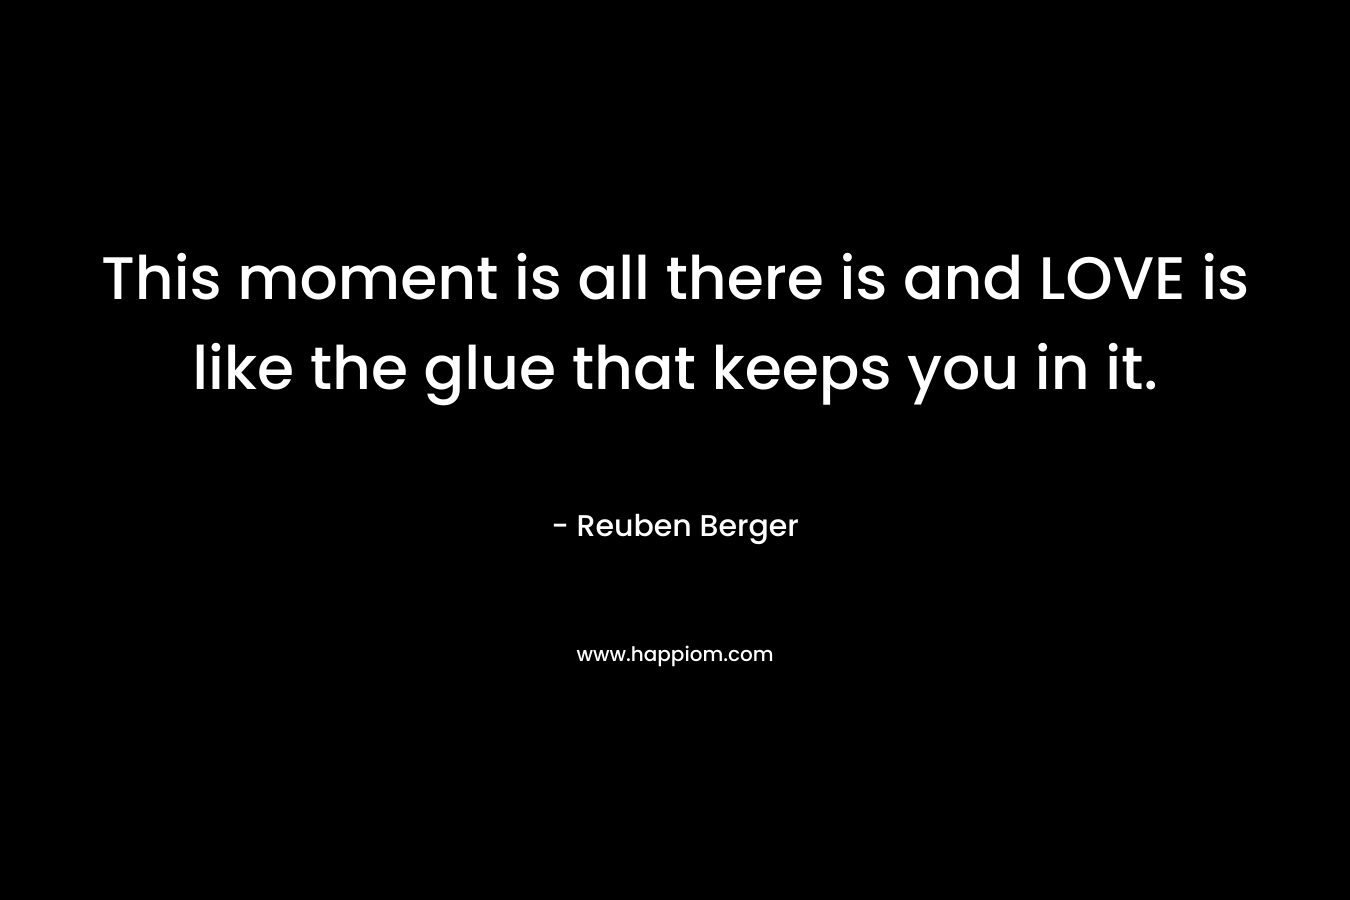 This moment is all there is and LOVE is like the glue that keeps you in it.